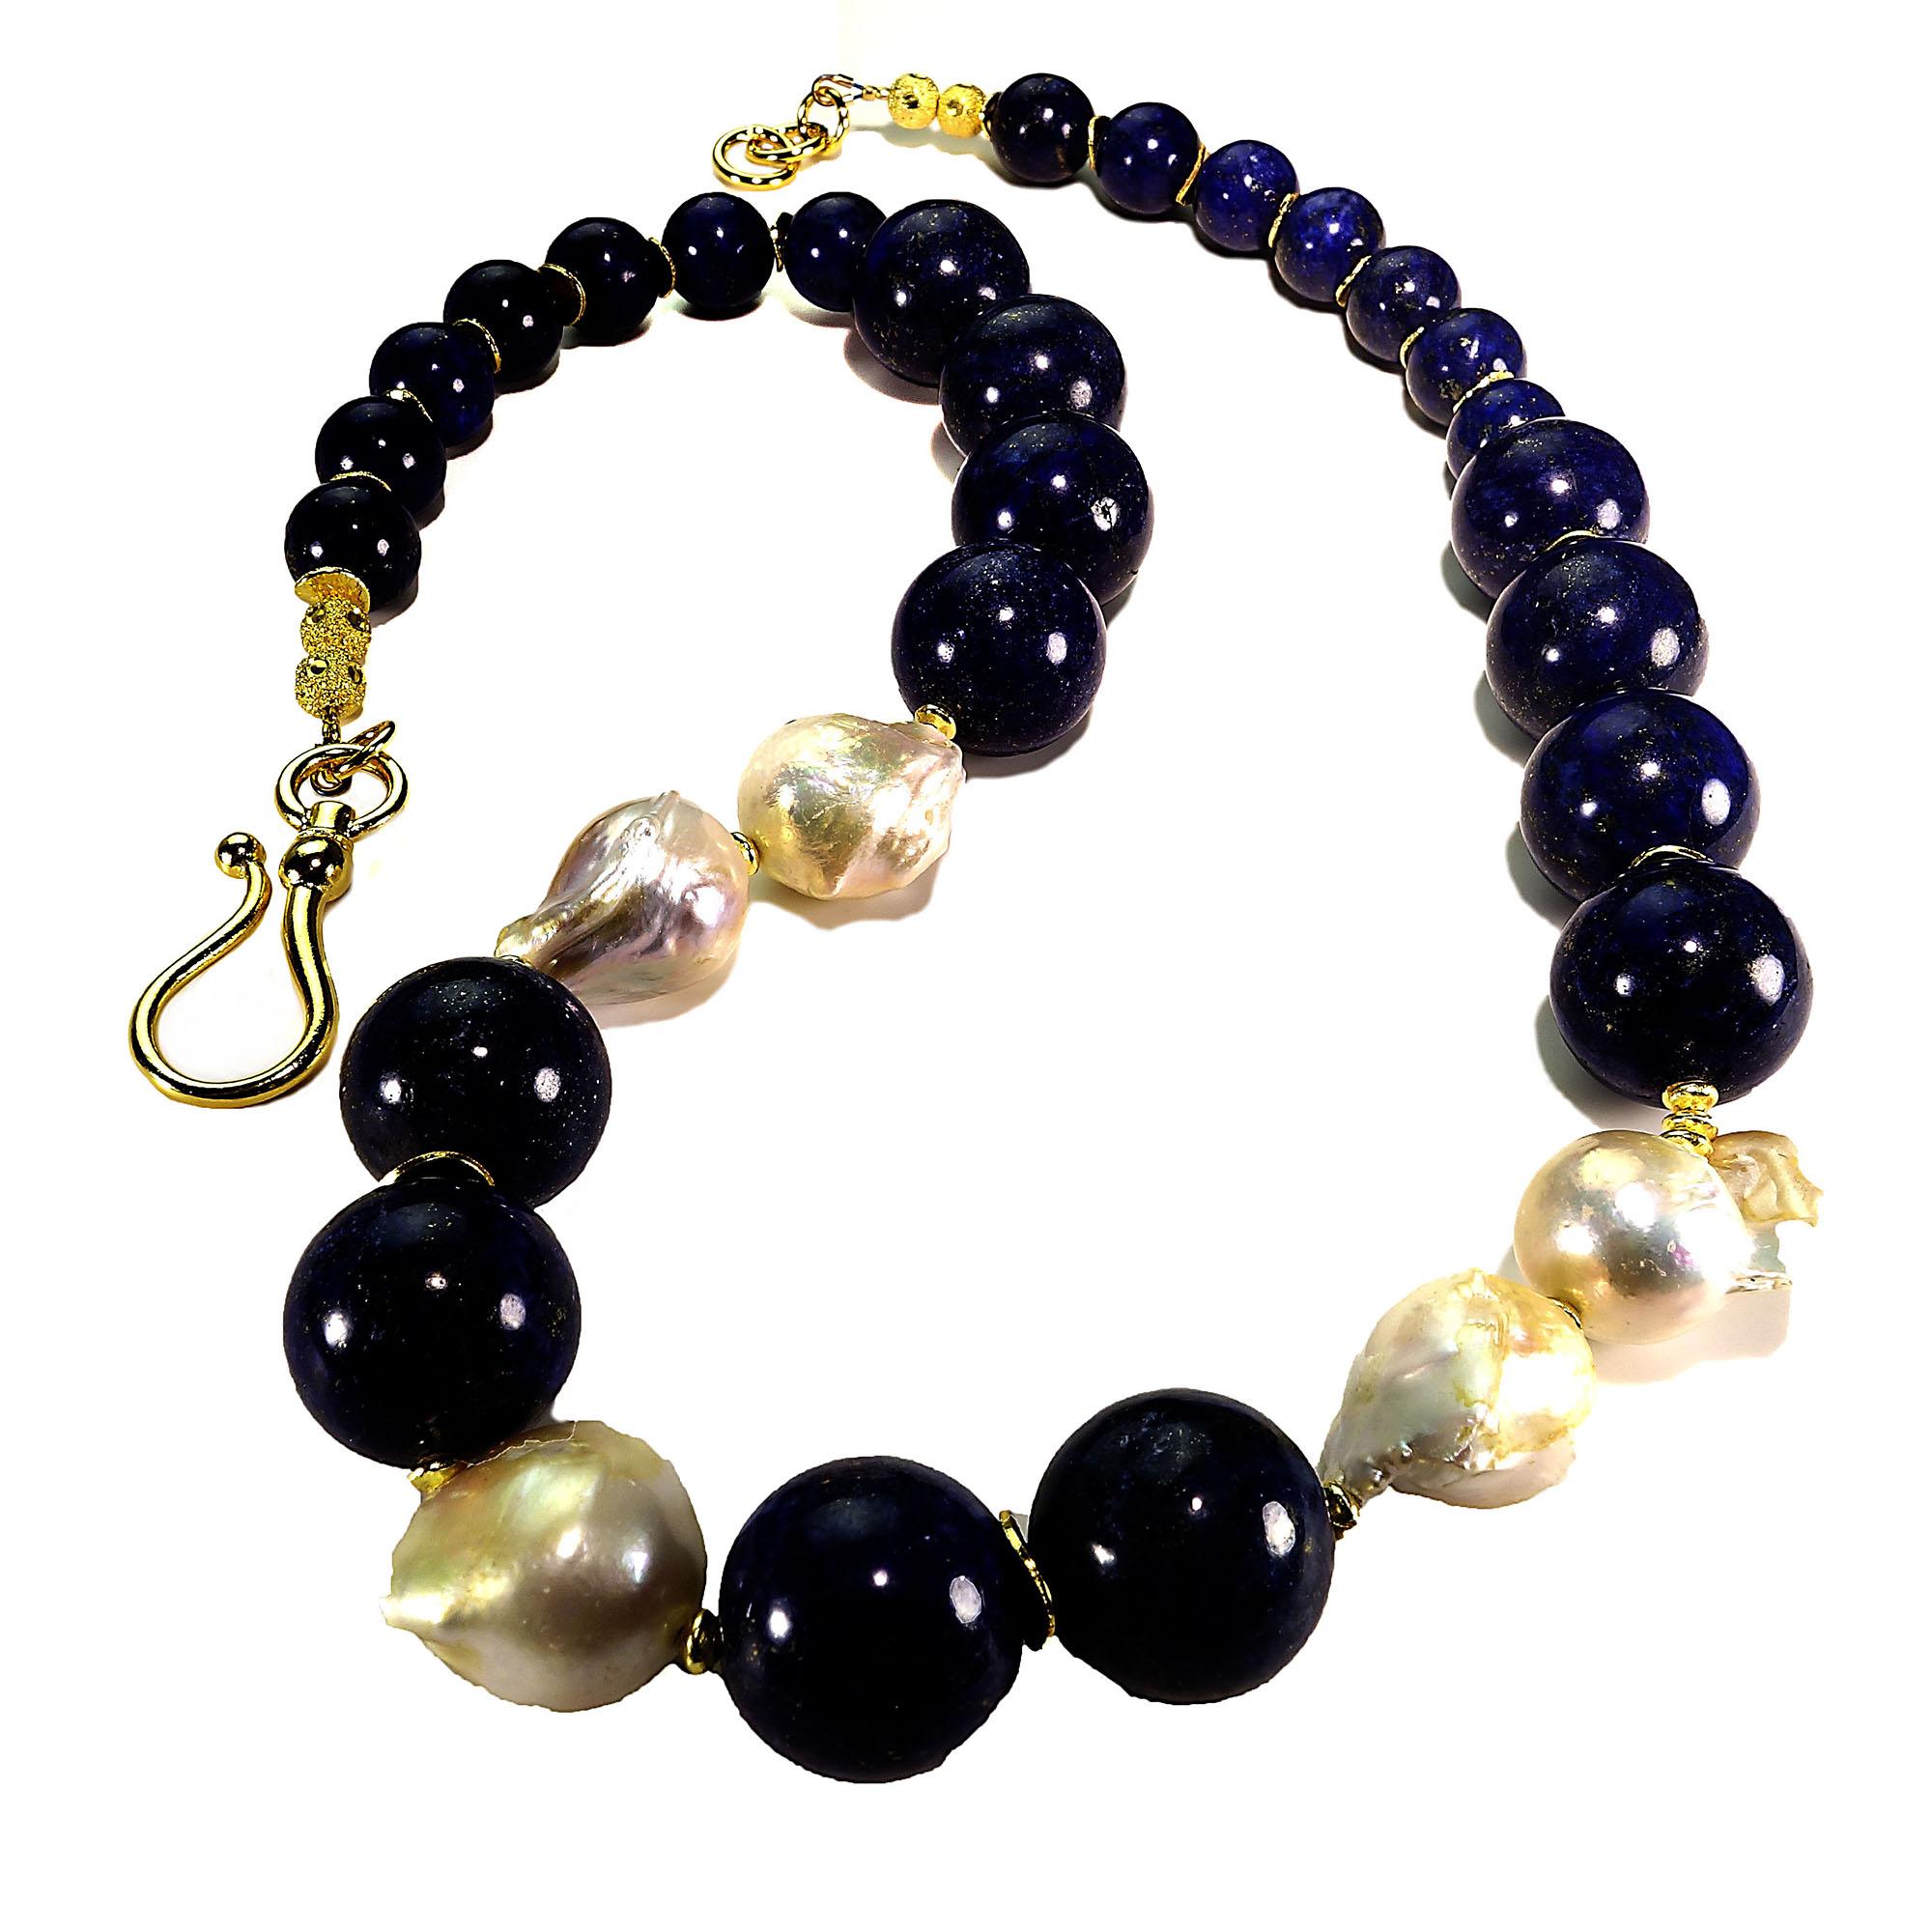 Bead AJD 24 Inch Dramatic Blue Lapis Lazuli and White Baroque Pearl Necklace